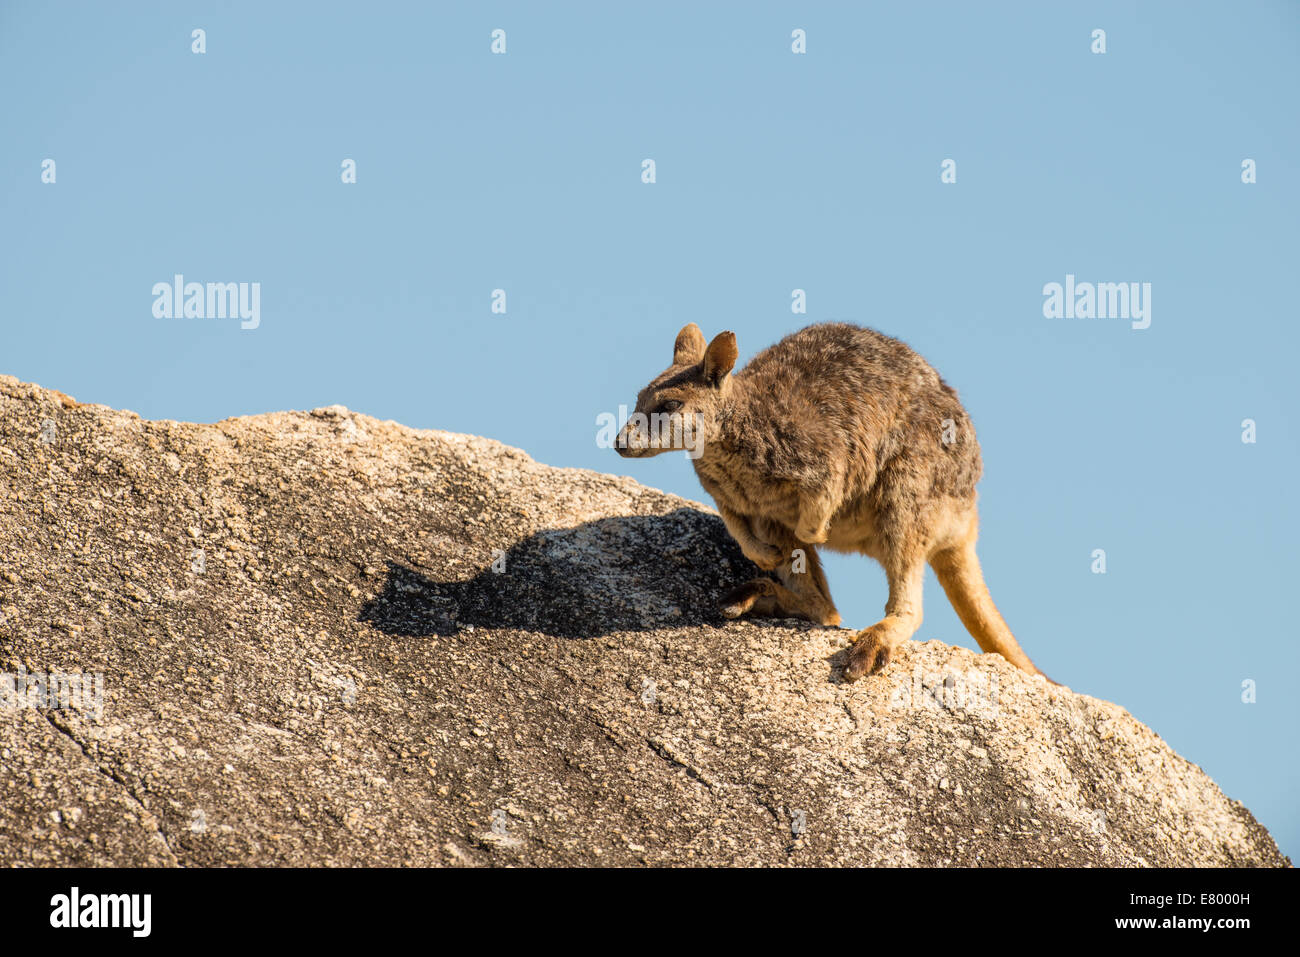 Stock photo of a Mareeba unadorned rock wallaby sitting on top of a boulder. Stock Photo